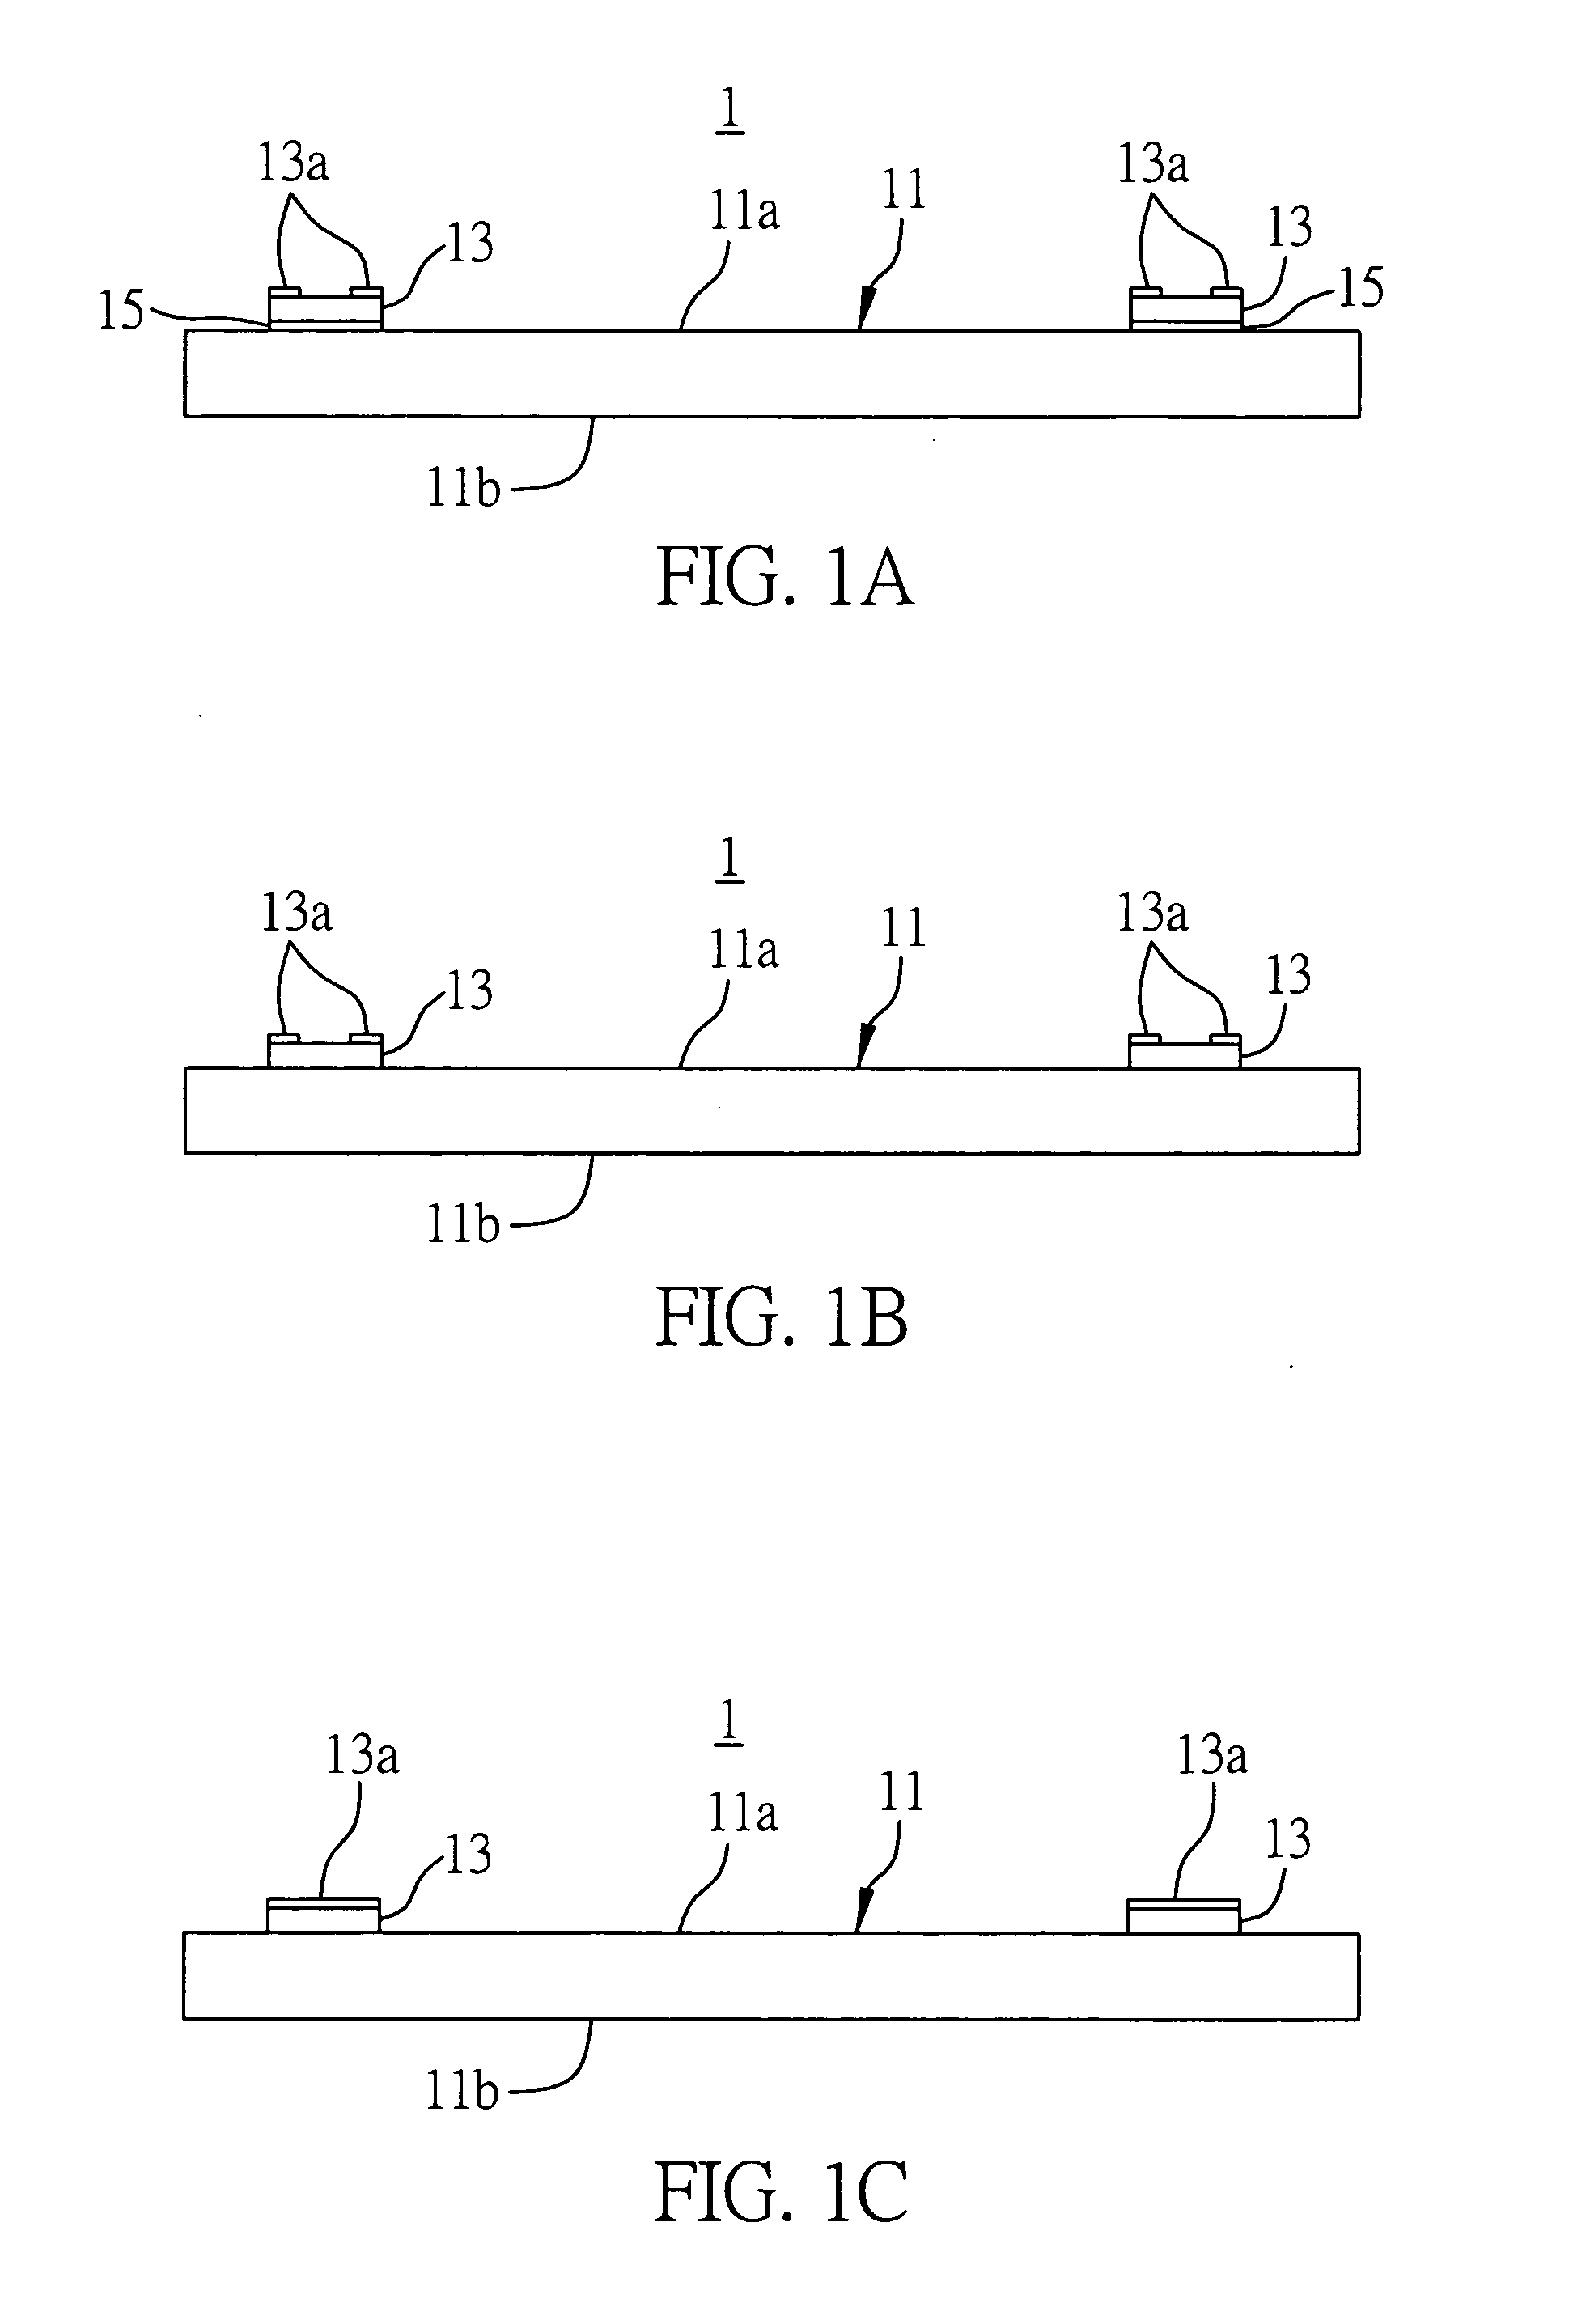 Substrate structure integrated with passive components